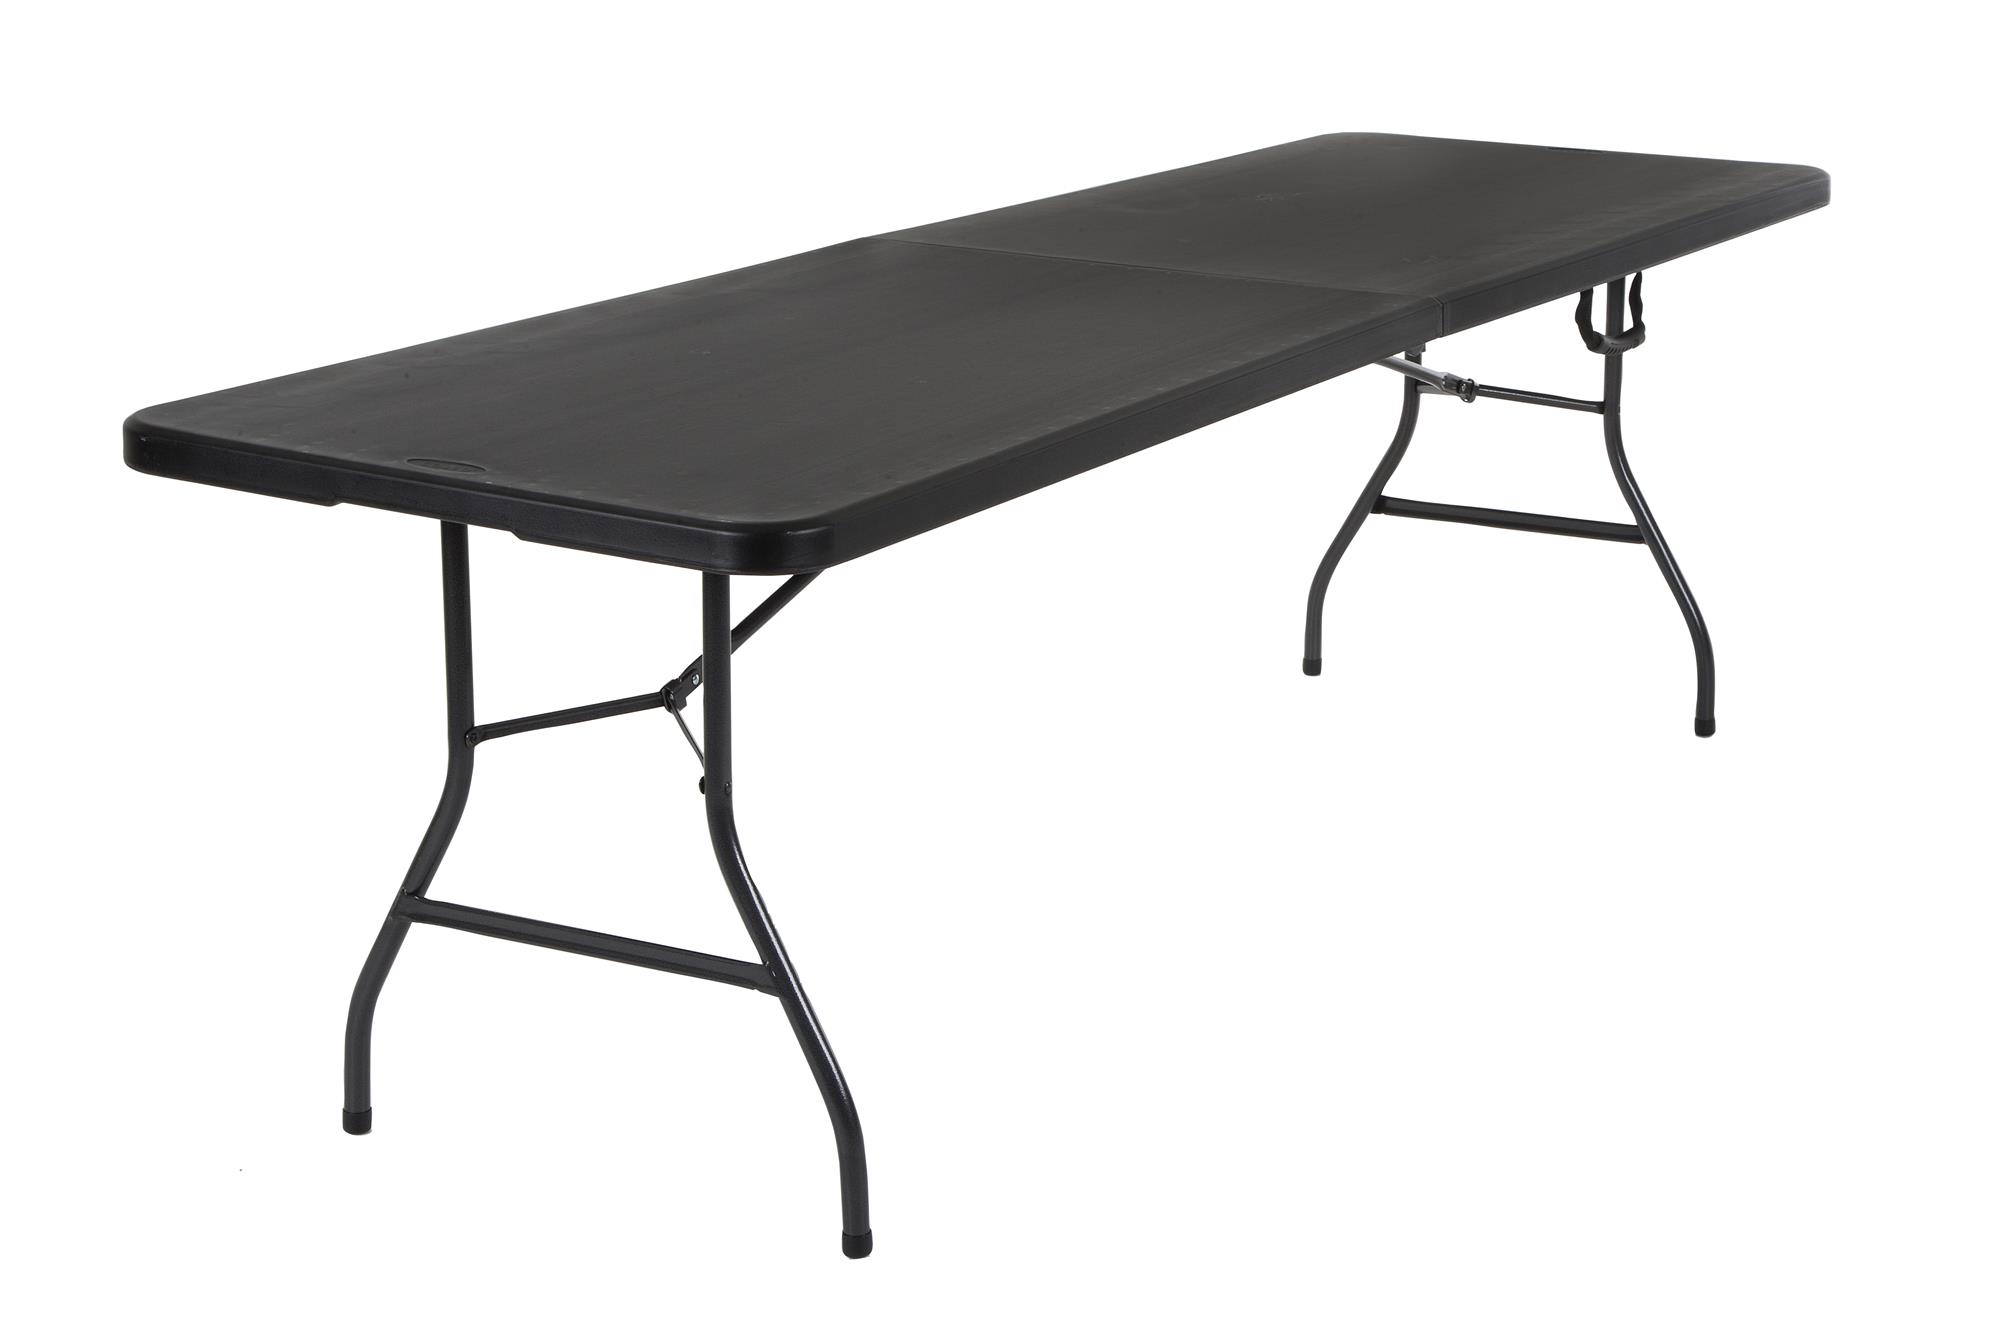 Cosco 8 Foot Centerfold Folding Table, Black - image 1 of 9